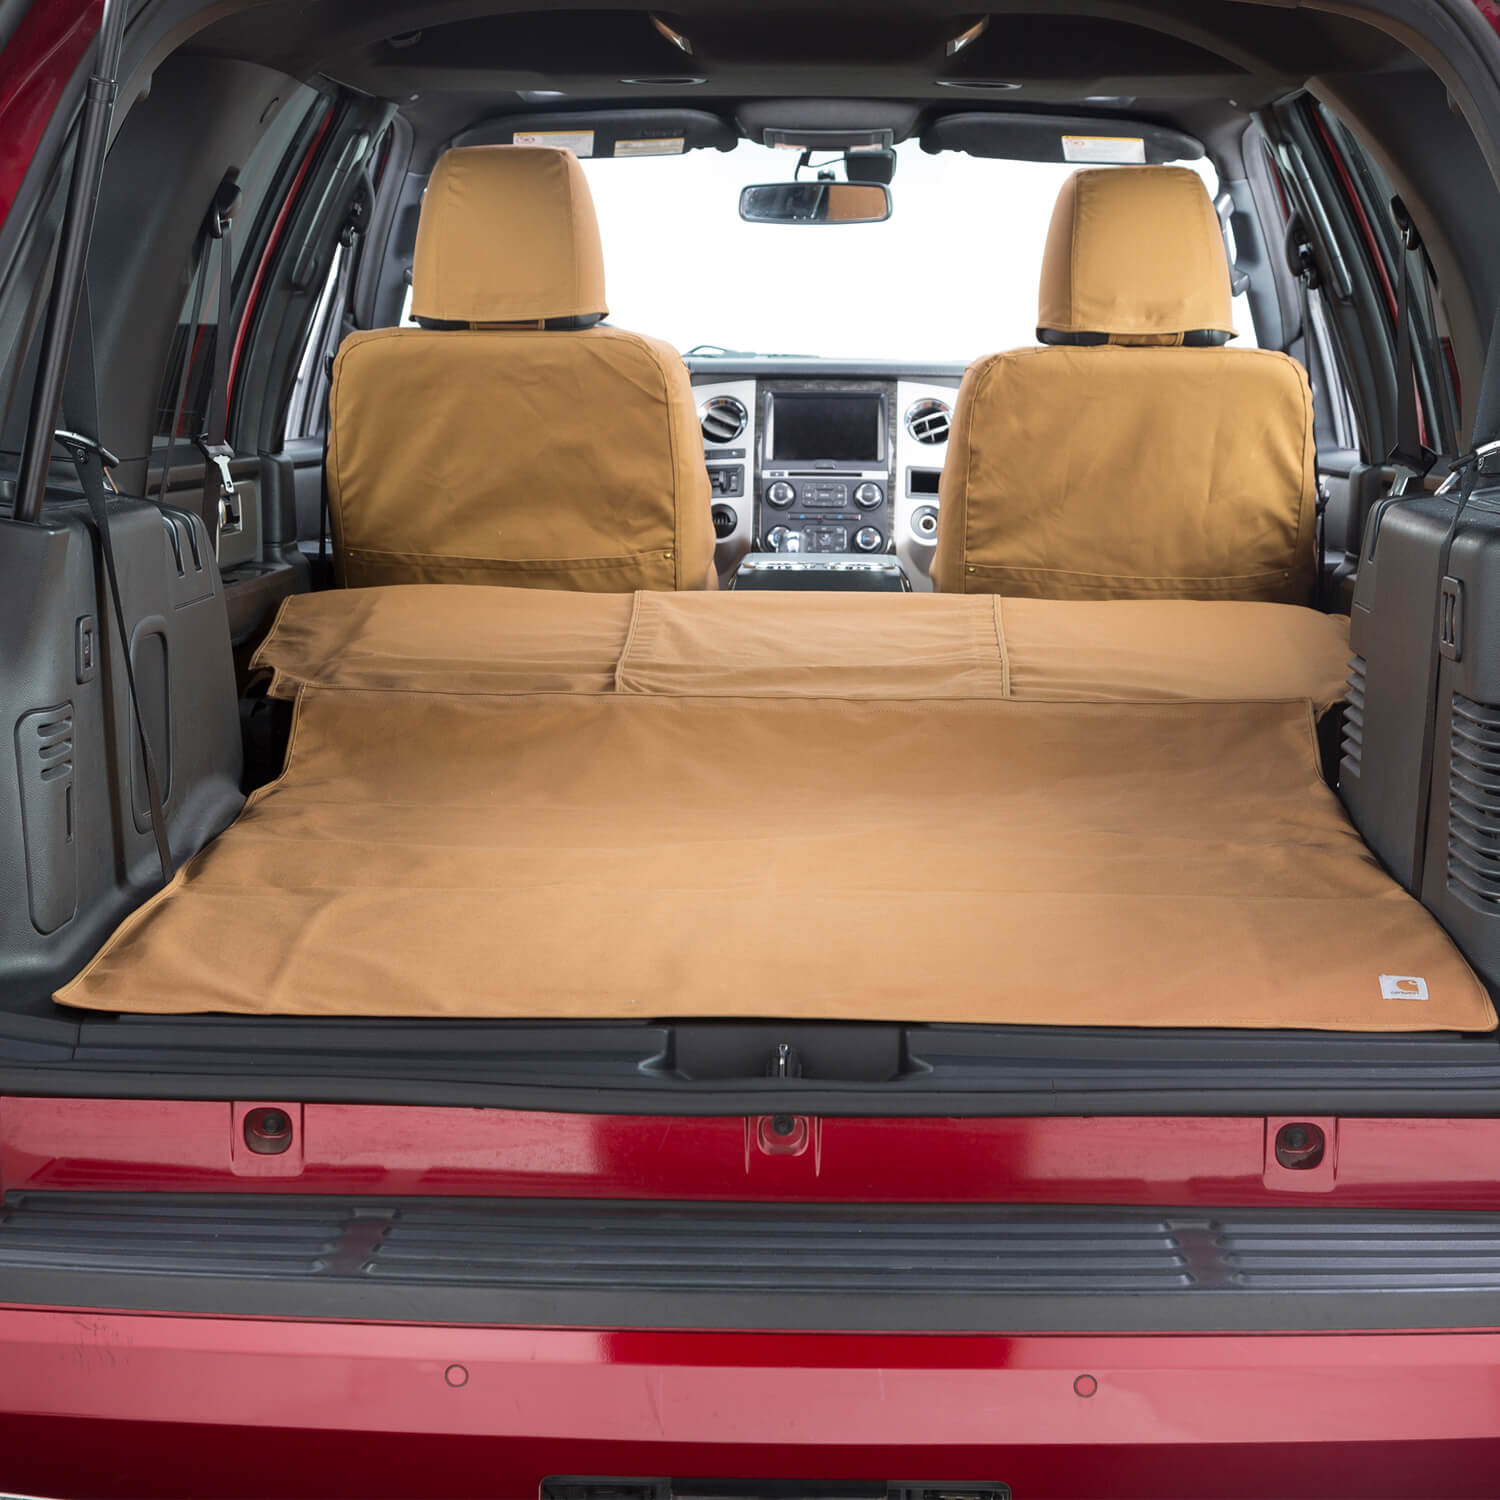 Are you the rugged outdoorsman type that loads your SUV up with fishing rods, tools, and hunting gear? If so your cargo space has probably seen better days. Protect the value of your SUV while adding the iconic style and protection Carhartt is known for. Our Cargo Area Liners provide a perfect fit with maximum coverage for the best protection.